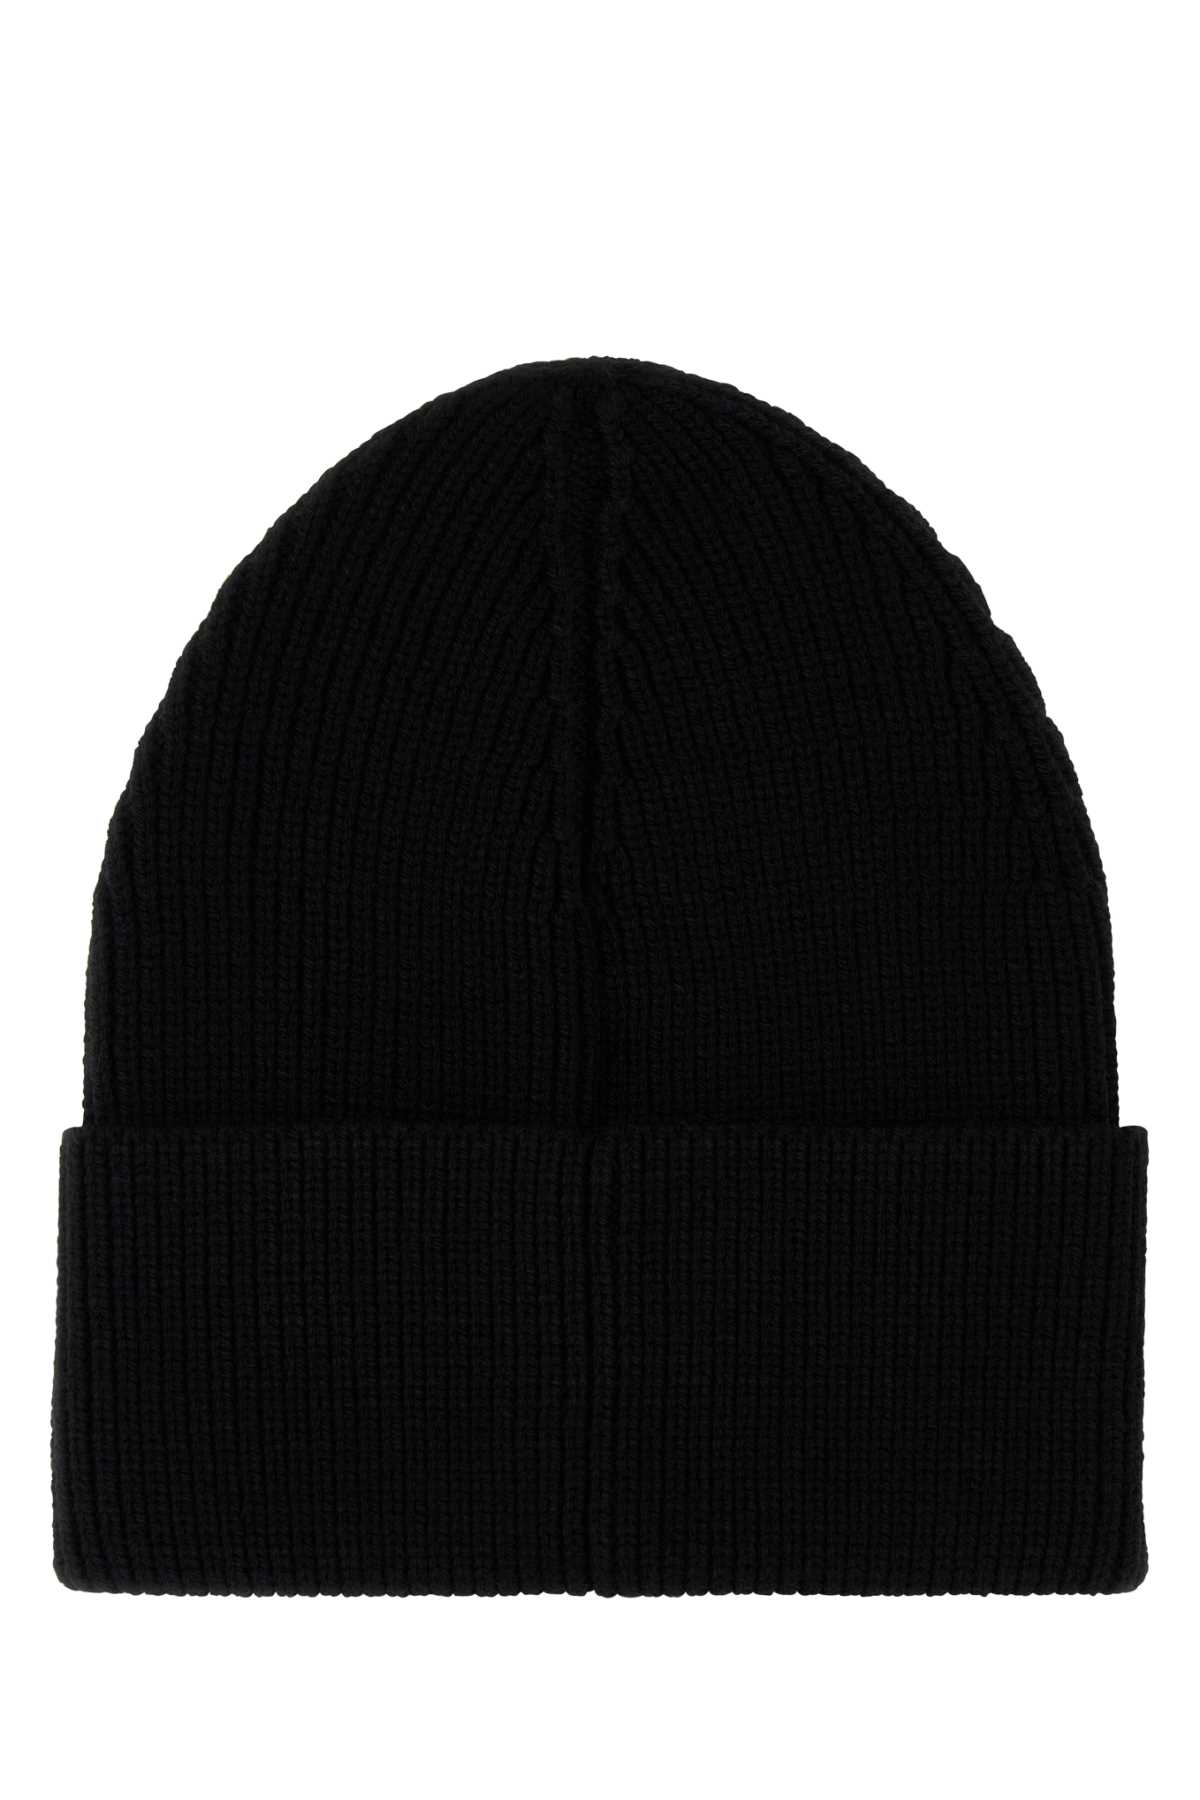 Palm Angels Black Wool And Acrylic Beanie Hat